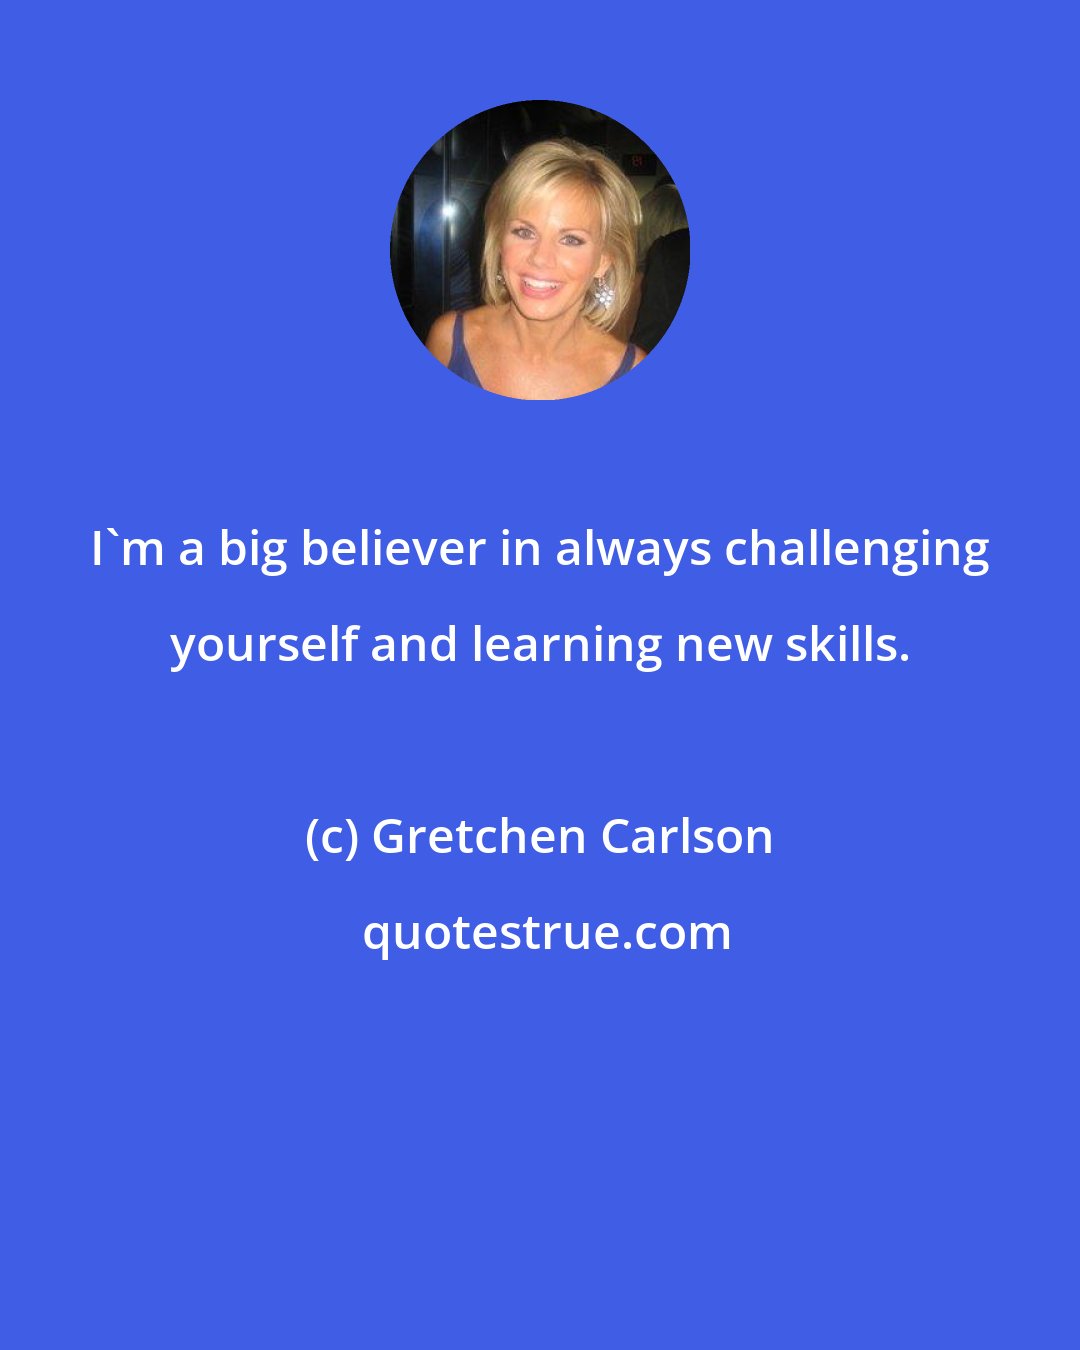 Gretchen Carlson: I'm a big believer in always challenging yourself and learning new skills.